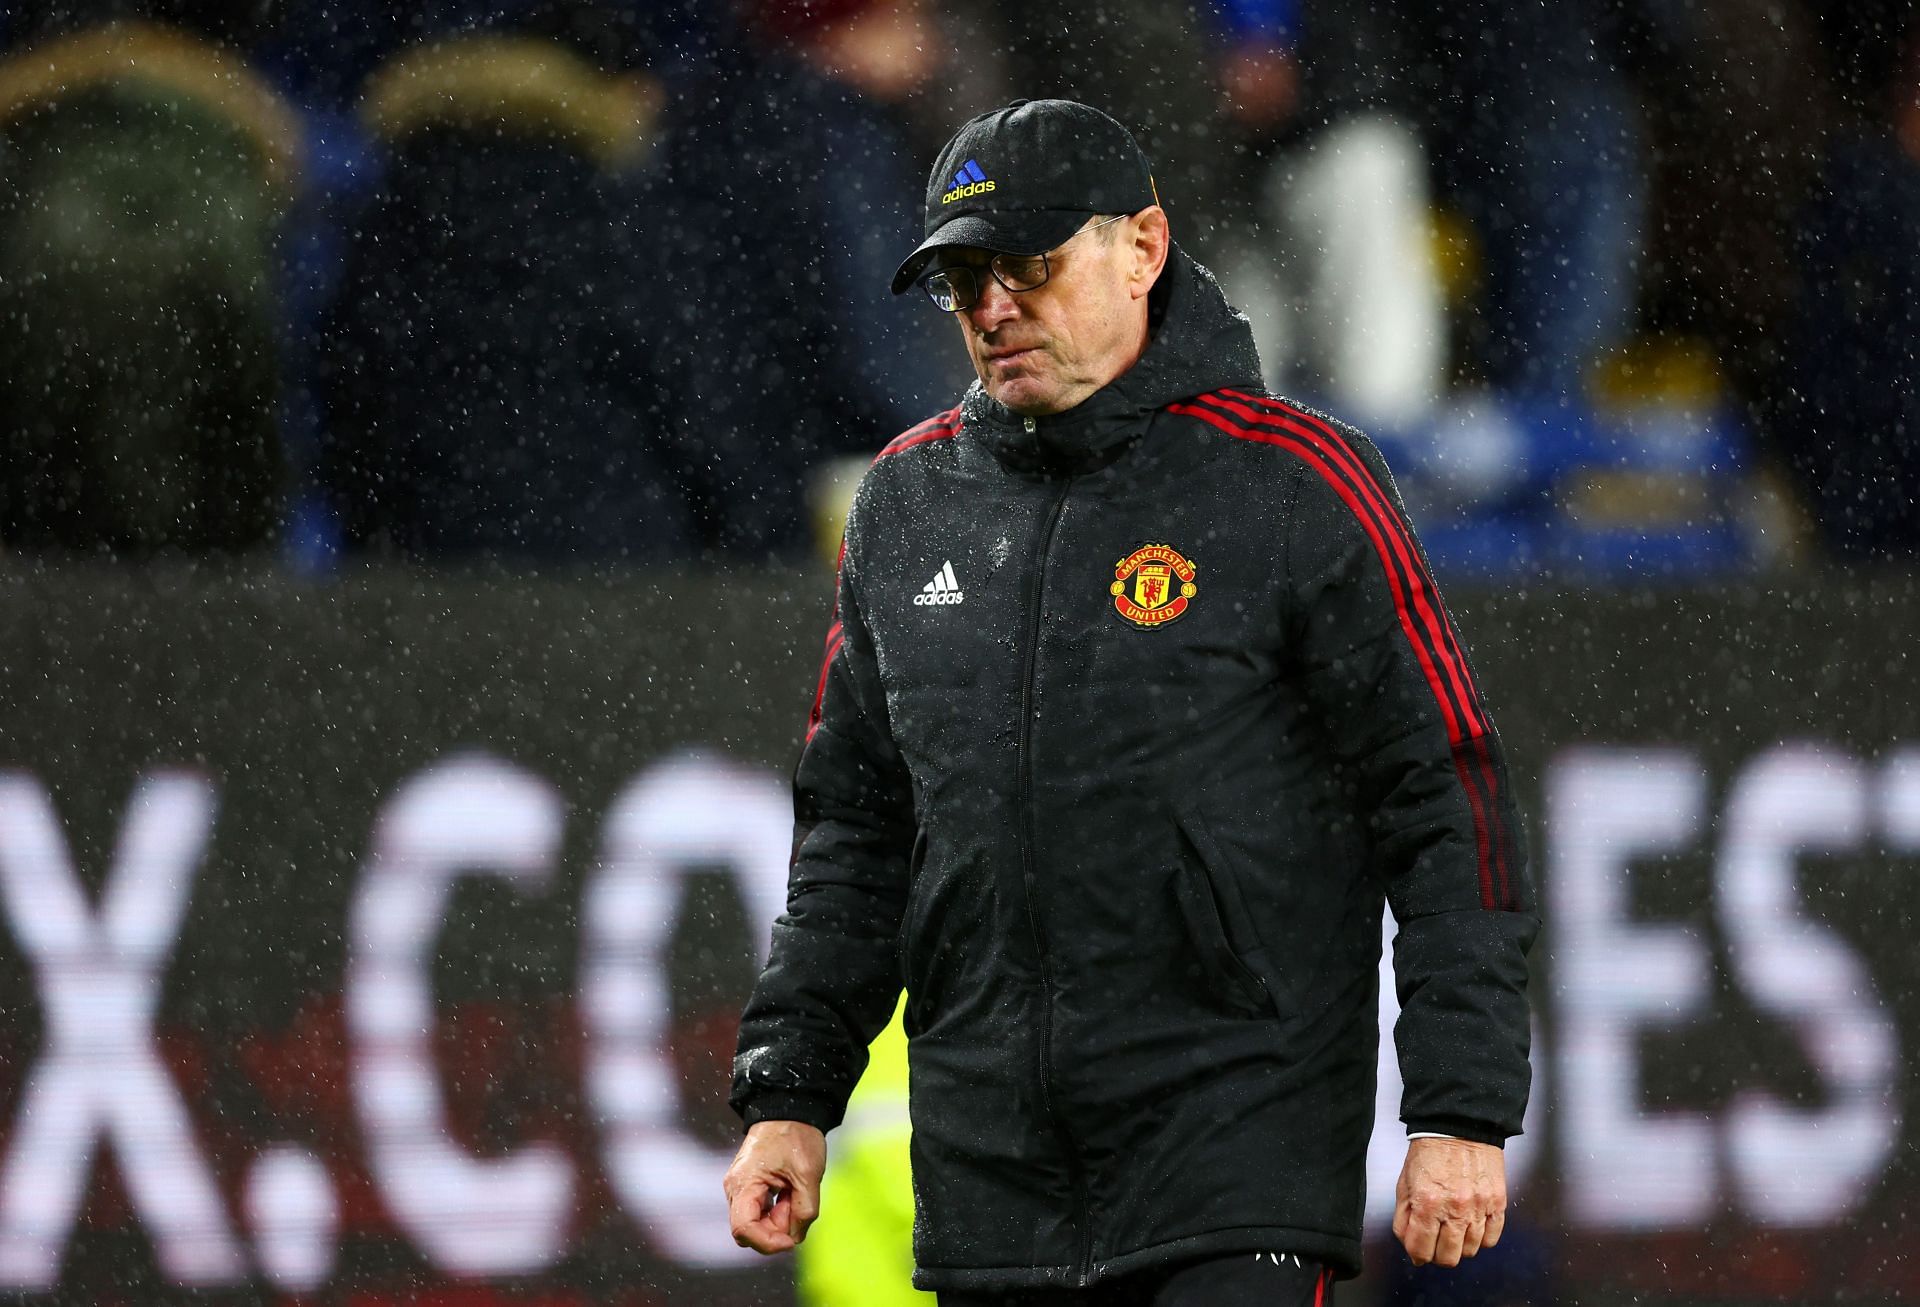 Manchester United Transfer News Roundup: Red Devils advised to drop Cristiano Ronaldo for Manchester Derby; Carlo Ancelotti willing to take charge at Old Trafford, and more – 5 March 2022